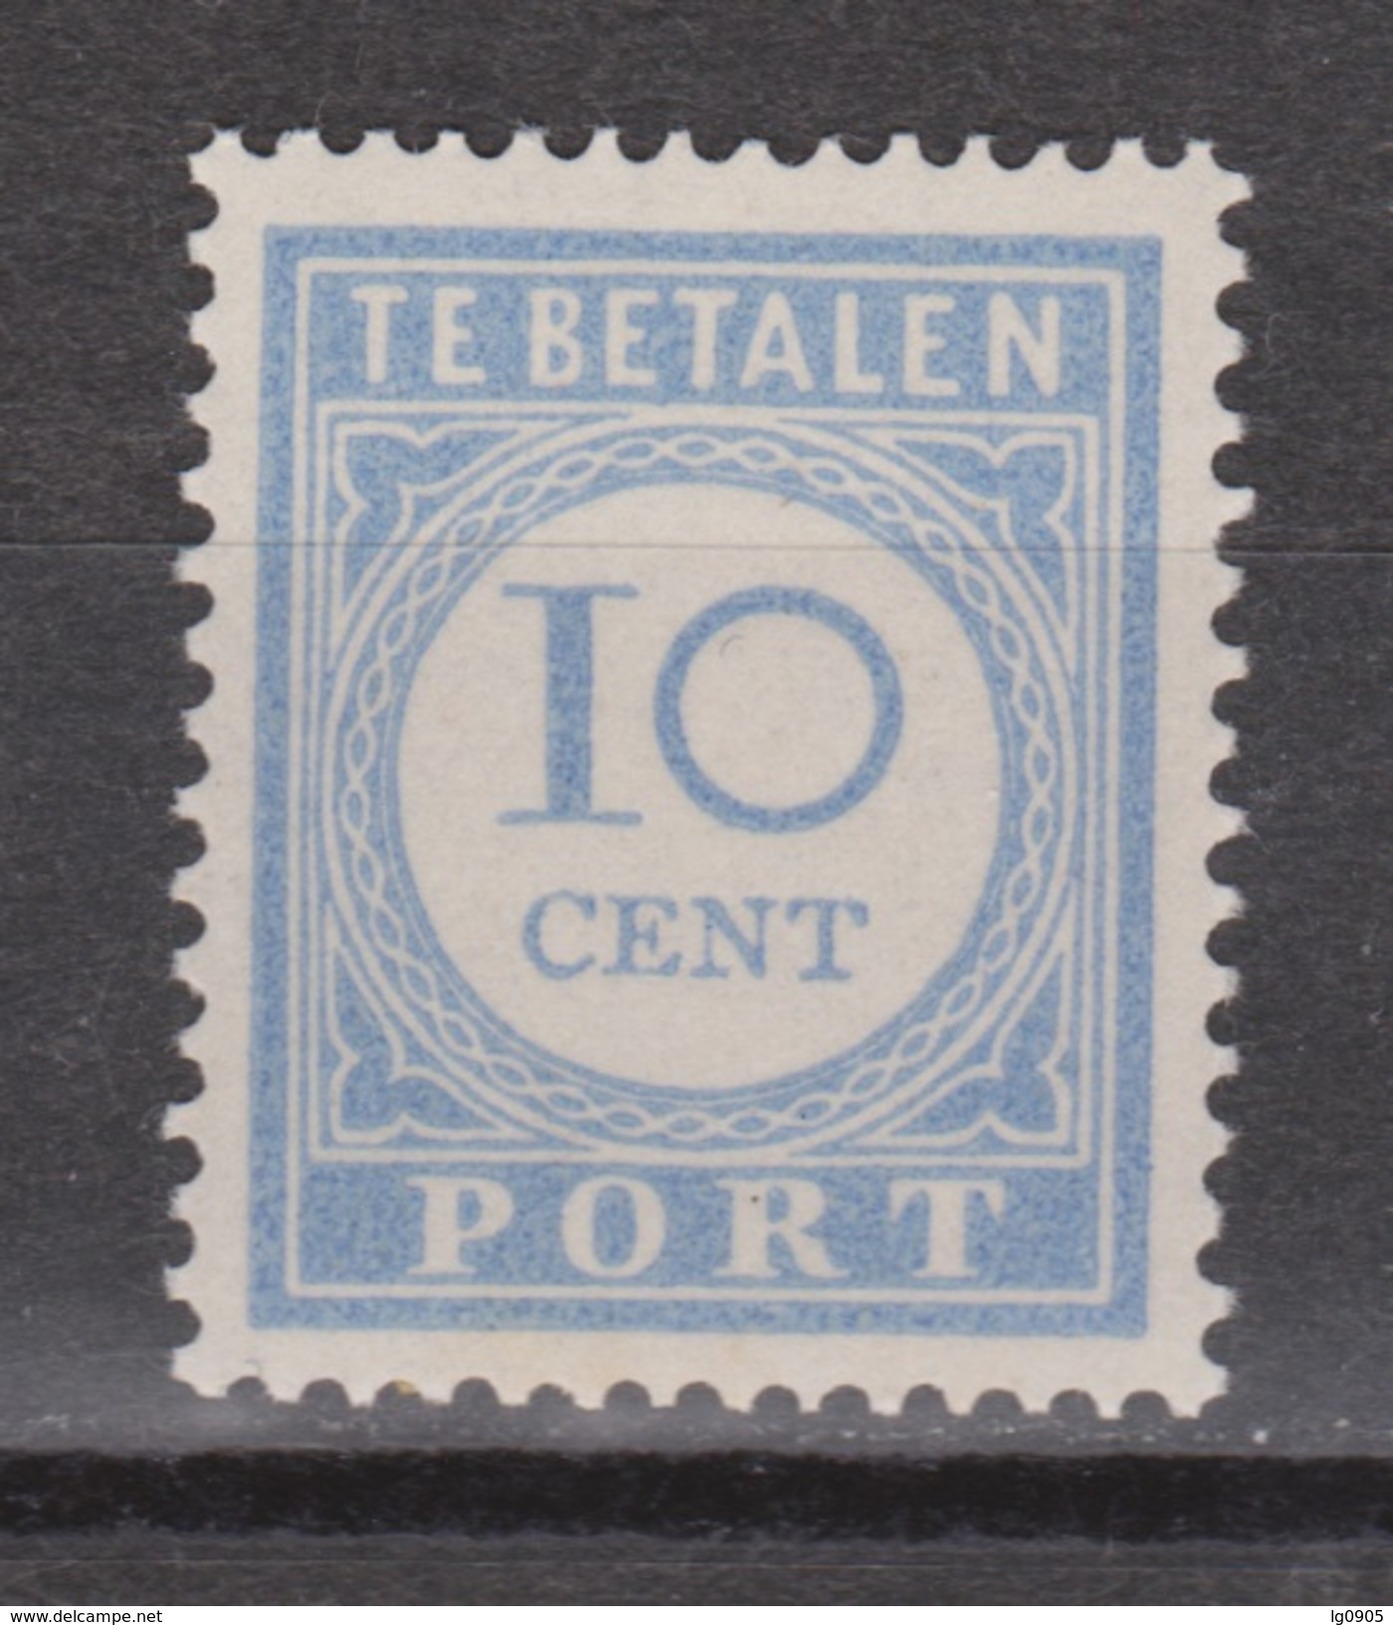 NVPH Nederland Netherlands Holanda Pays Bas Port 55 MLH Timbre-taxe Postmarke Sellos De Correos NOW MANY DUE STAMPS - Impuestos